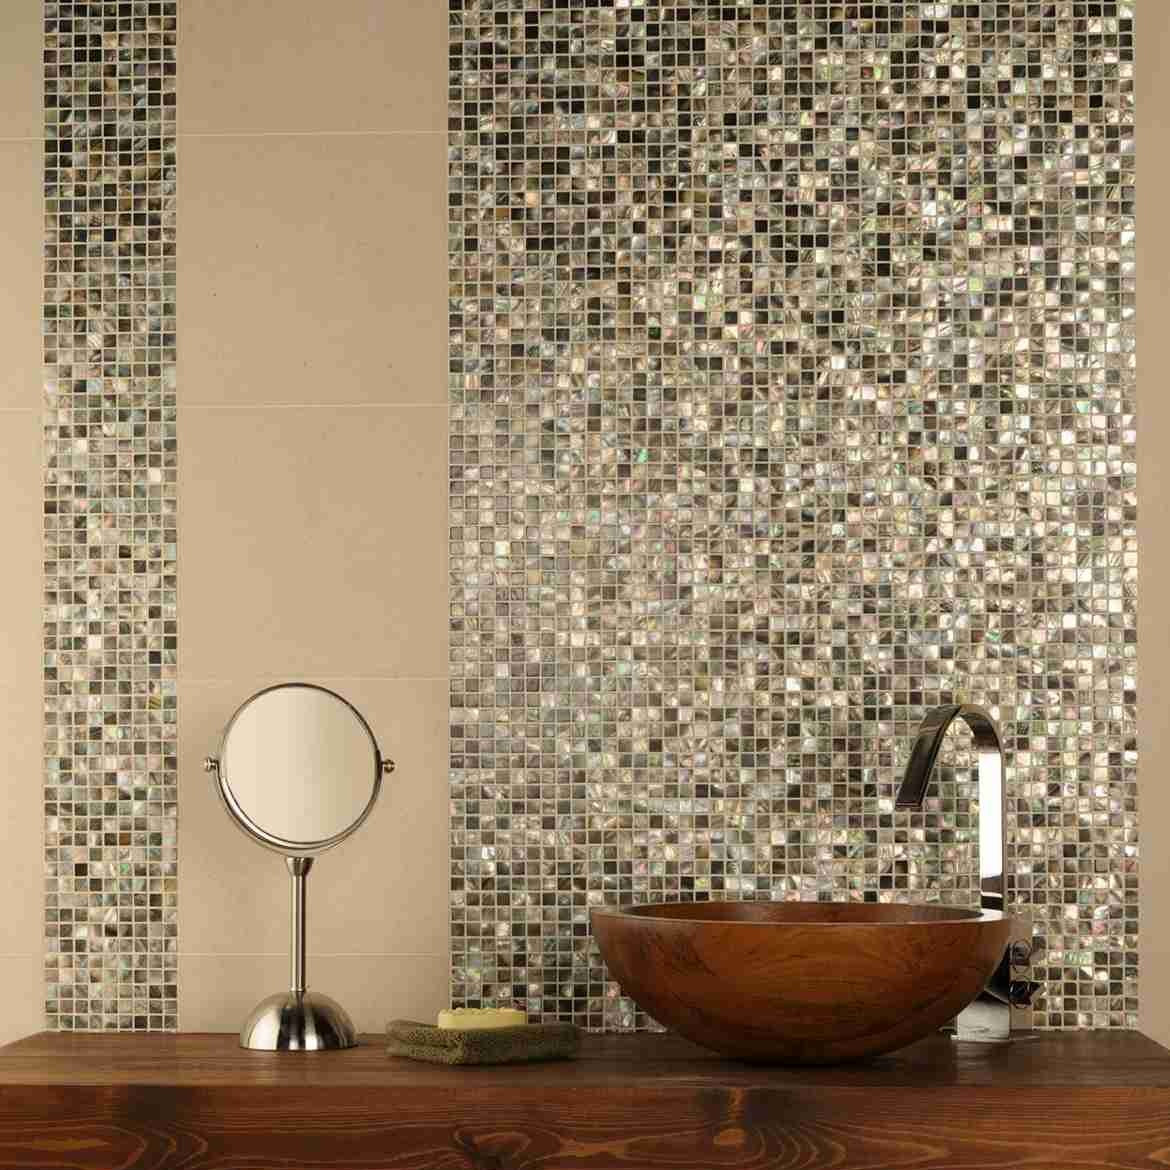 Original Style Mosaics Mother Of Pearl Shell Mosaic Tile 30x30cm